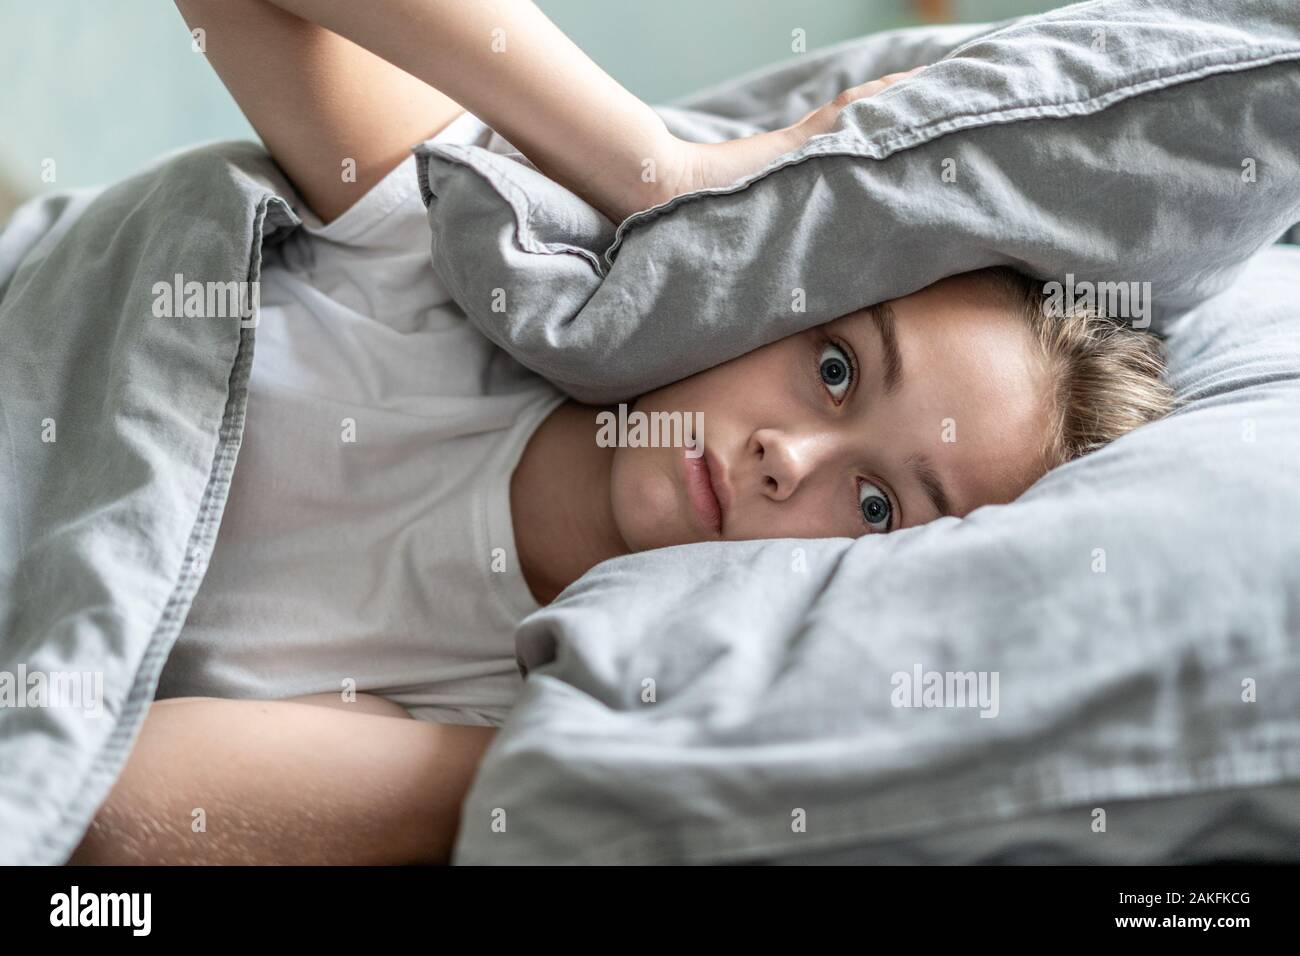 Woman with insomnia lying in bed with open eyes. Early morning hours. Insomnia and sleep problems. Relax and sleep concept. Feels sleepy and tired. Early to get up. Relax and sleep concept. Stock Photo